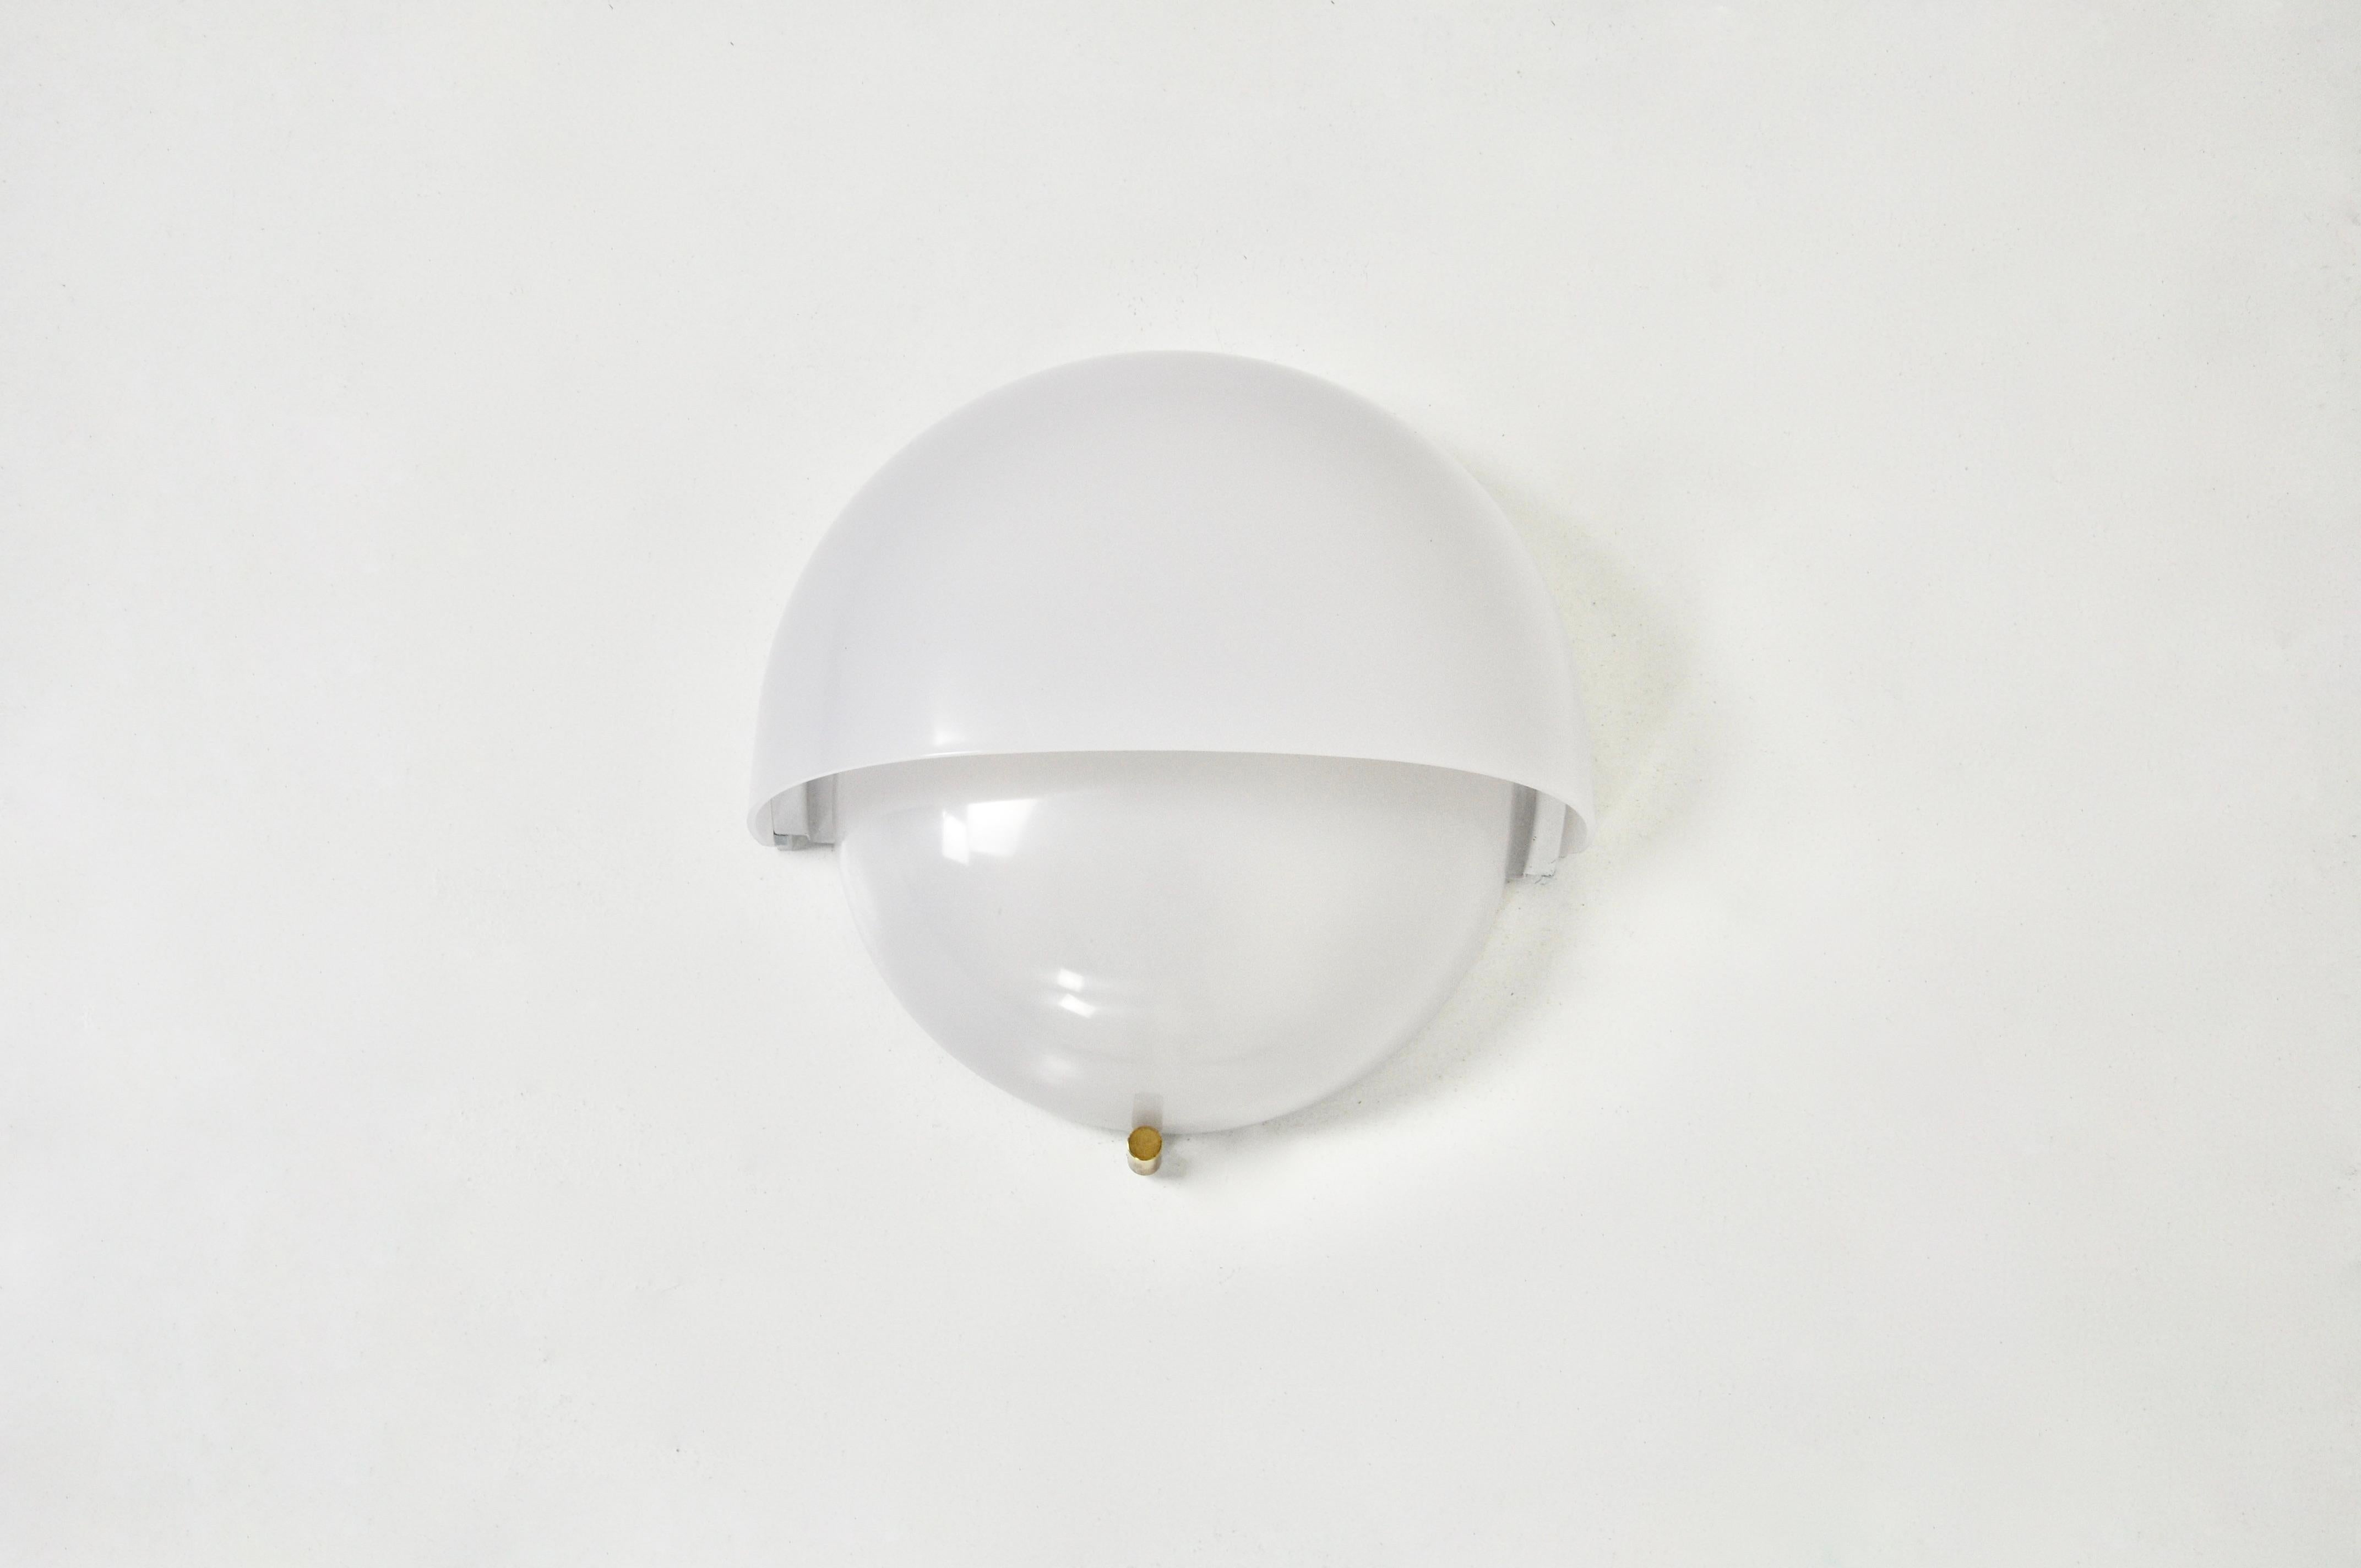 Wall lamp in plastic and metal by Vico Magistretti with original packaging. Wear due to age and time.